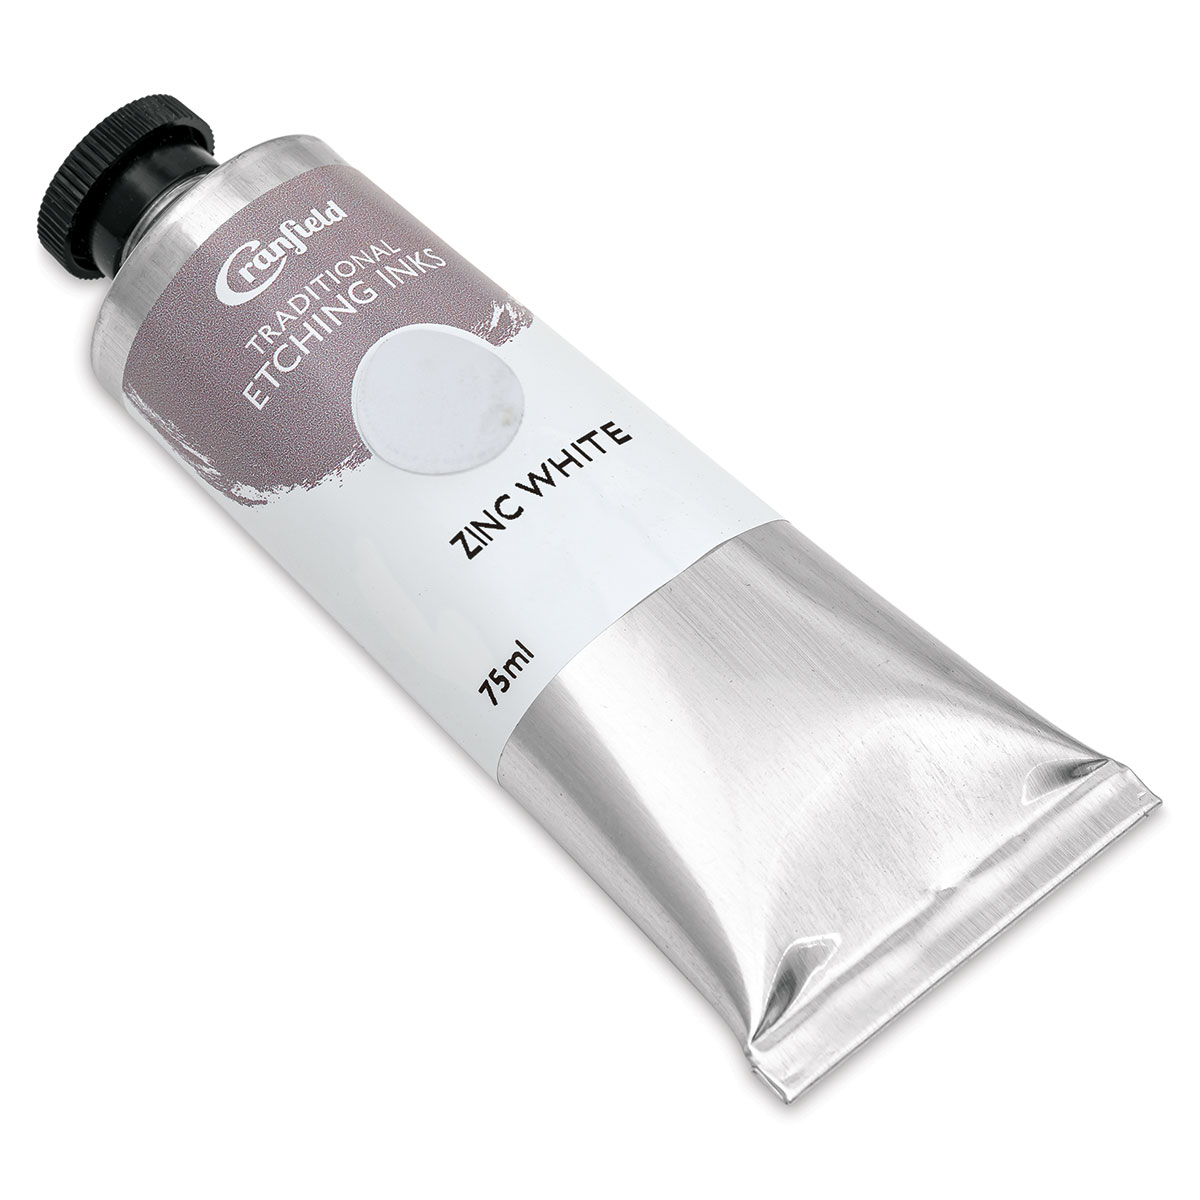 Cranfield Traditional Etching Ink - Zinc White, 75 ml